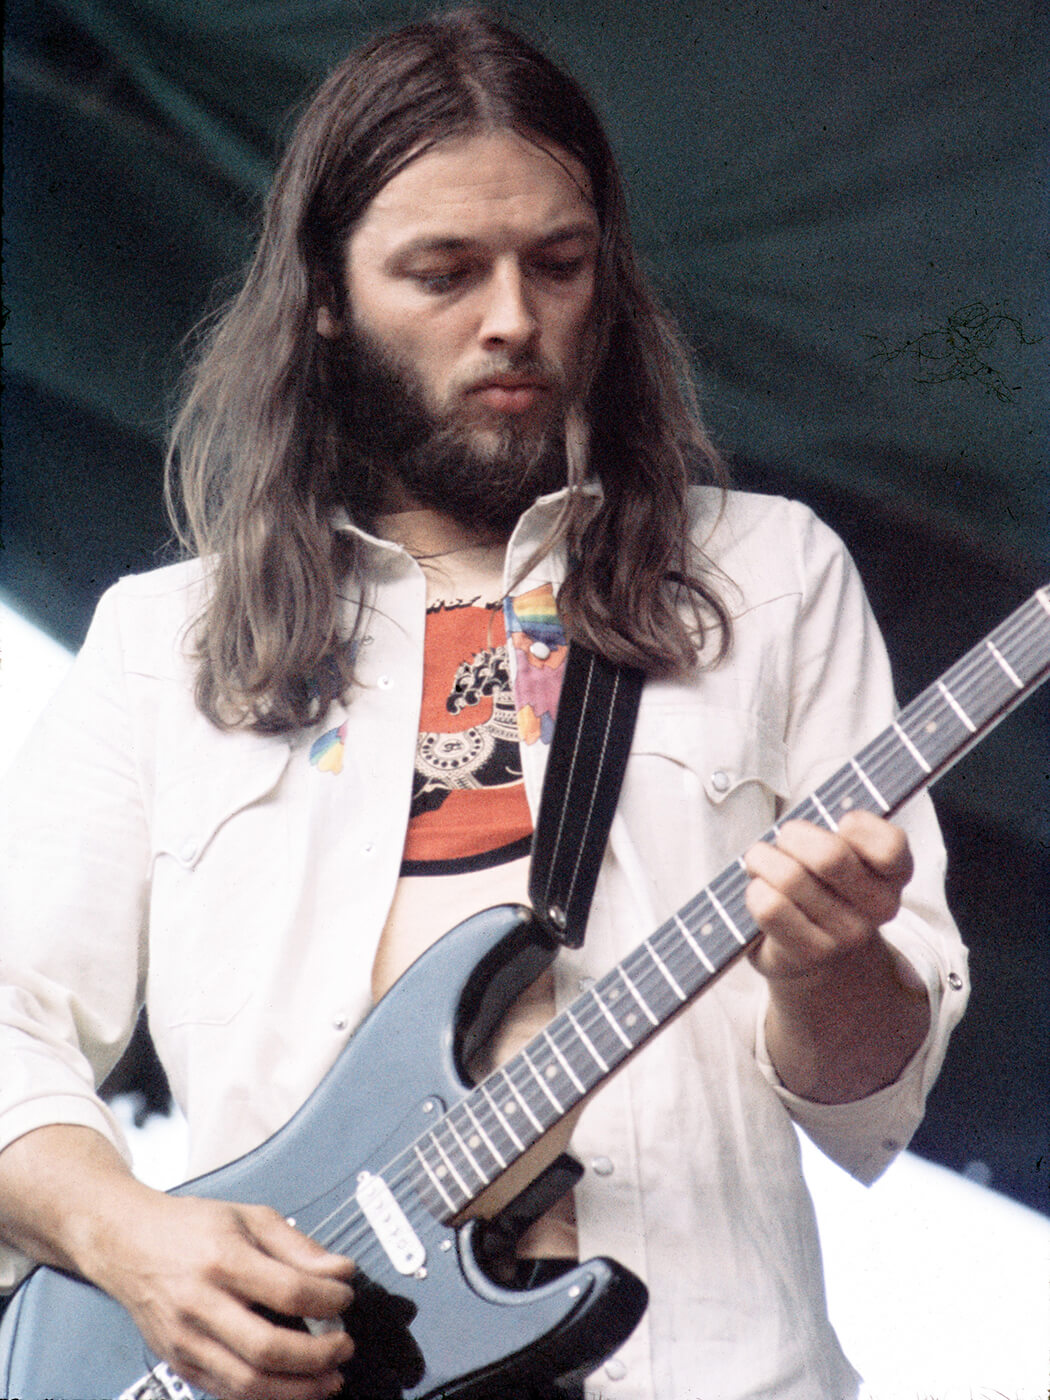 David Gilmour playing a black Stratocaster in 1974, photo by Chris Walter/WireImage via Getty Images